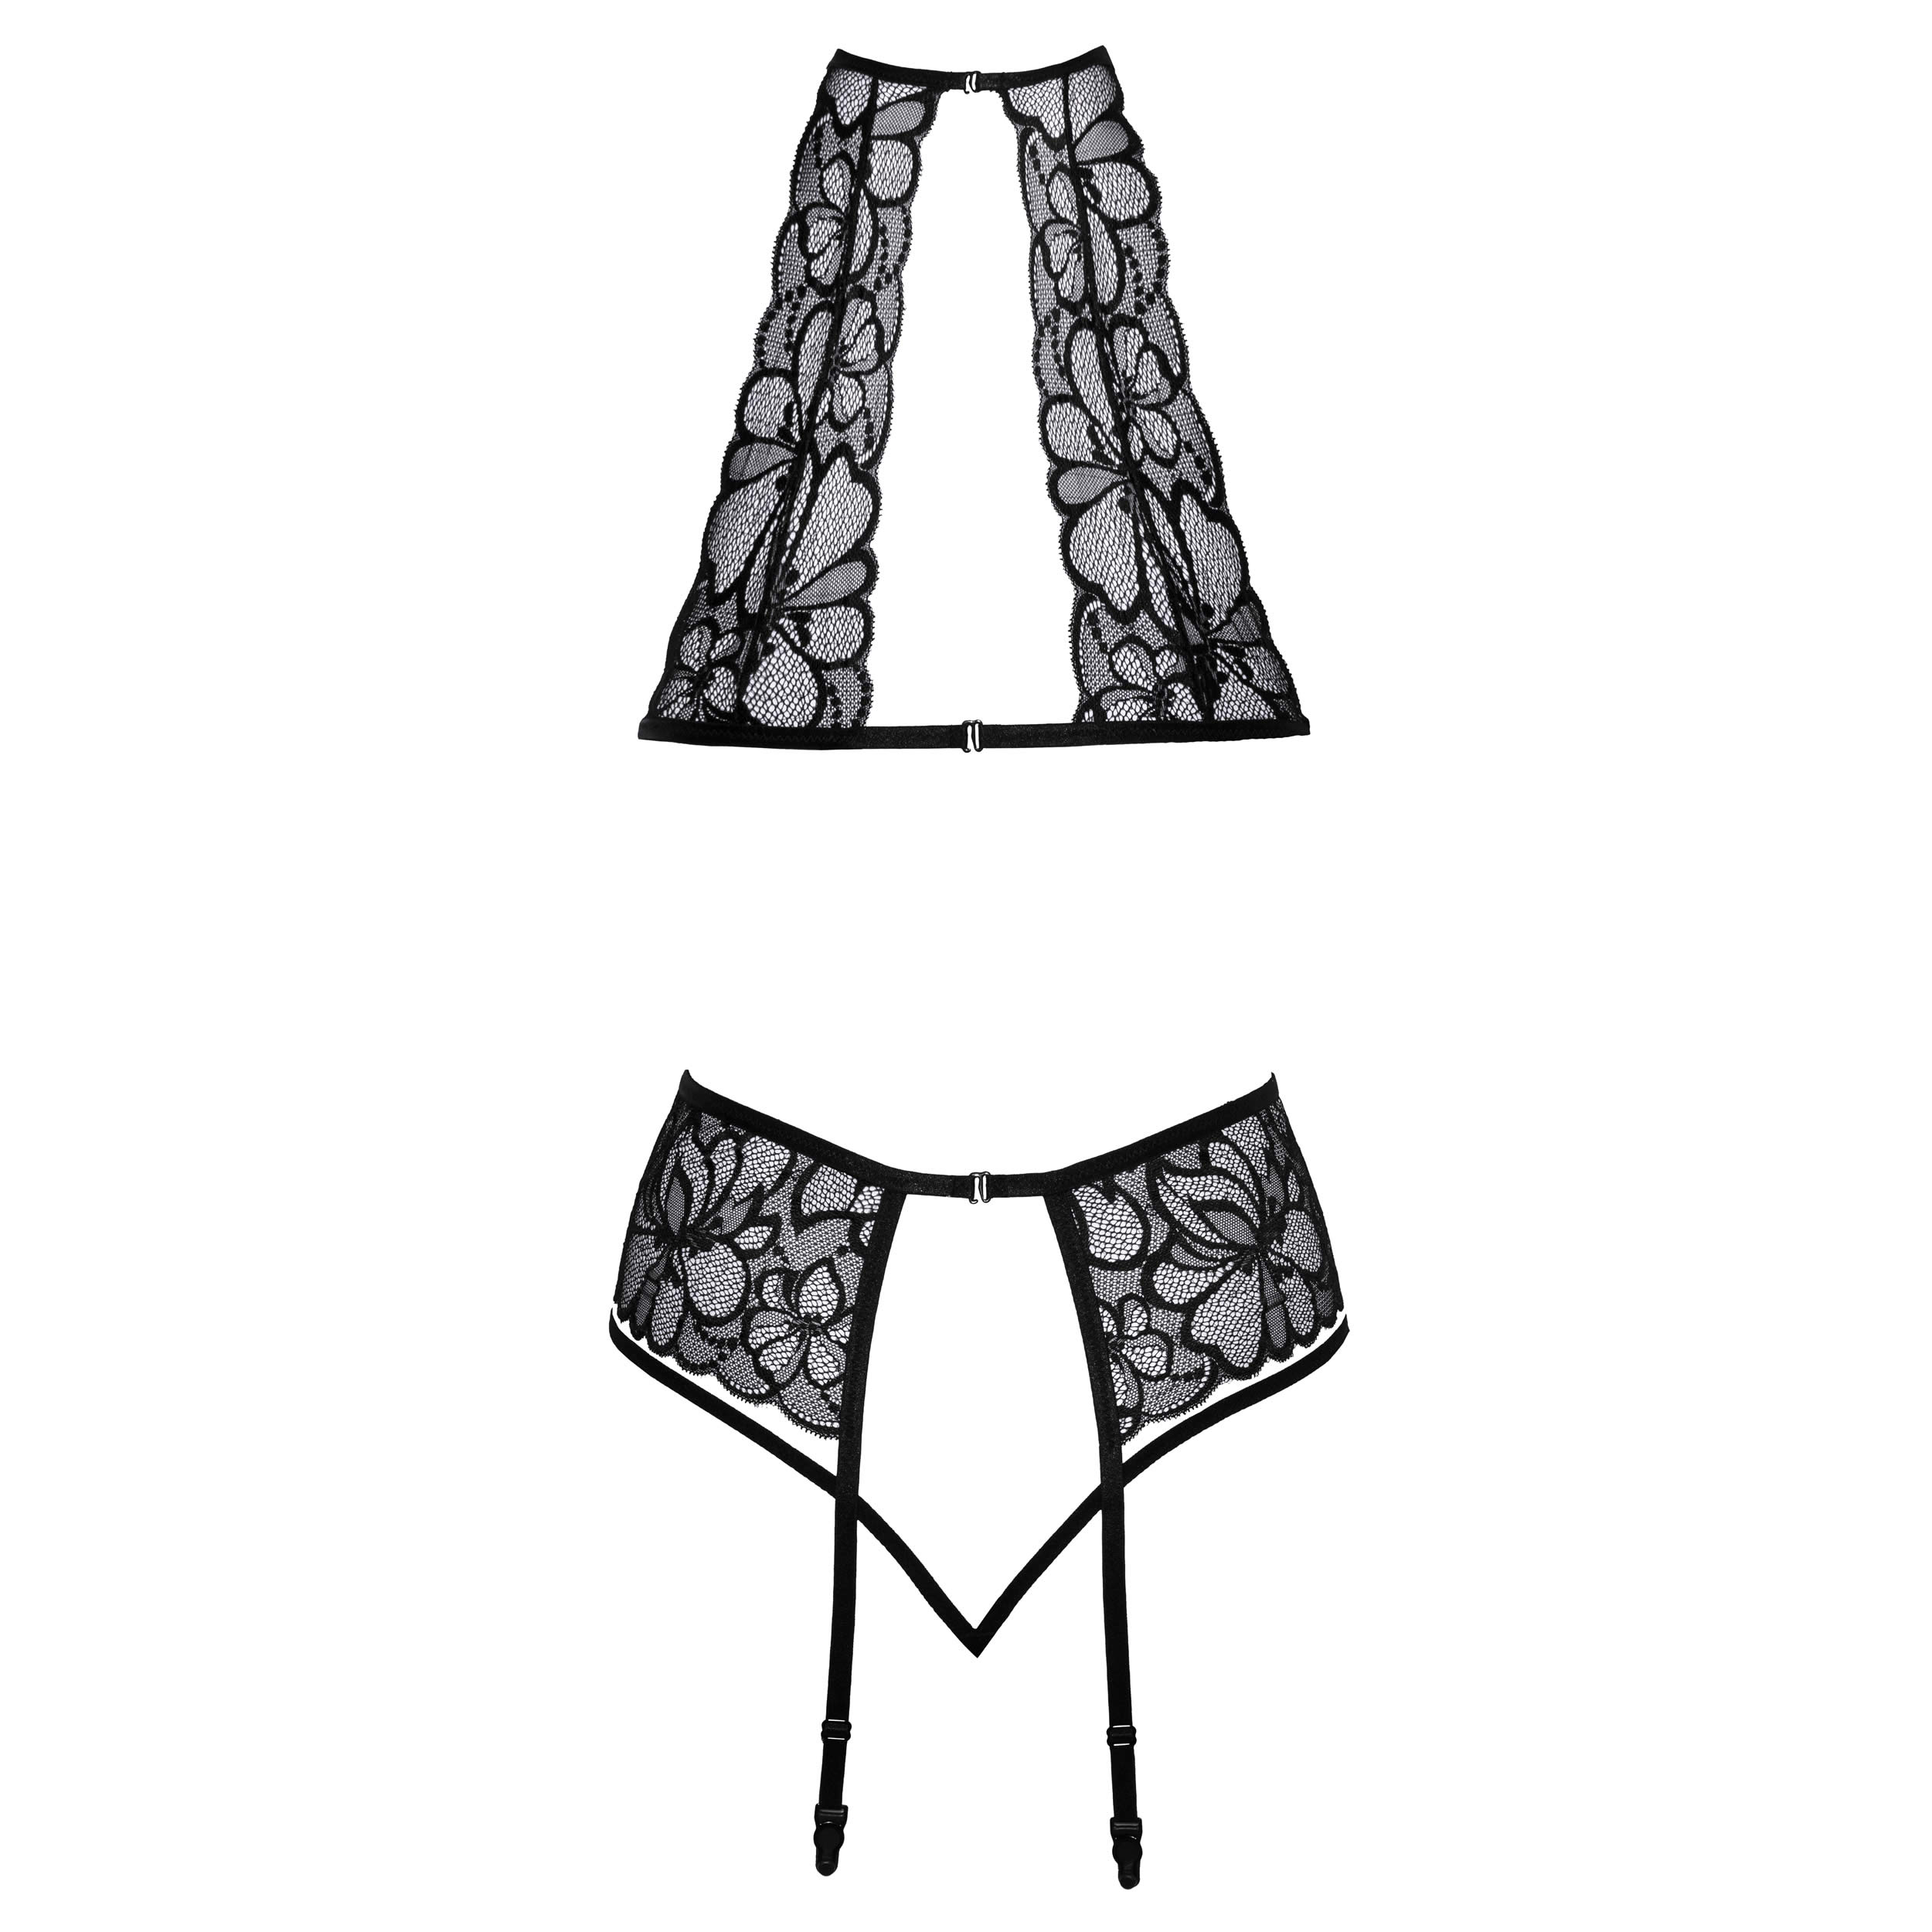 Kissable Lace Lingerie Set in Black with Suspenders